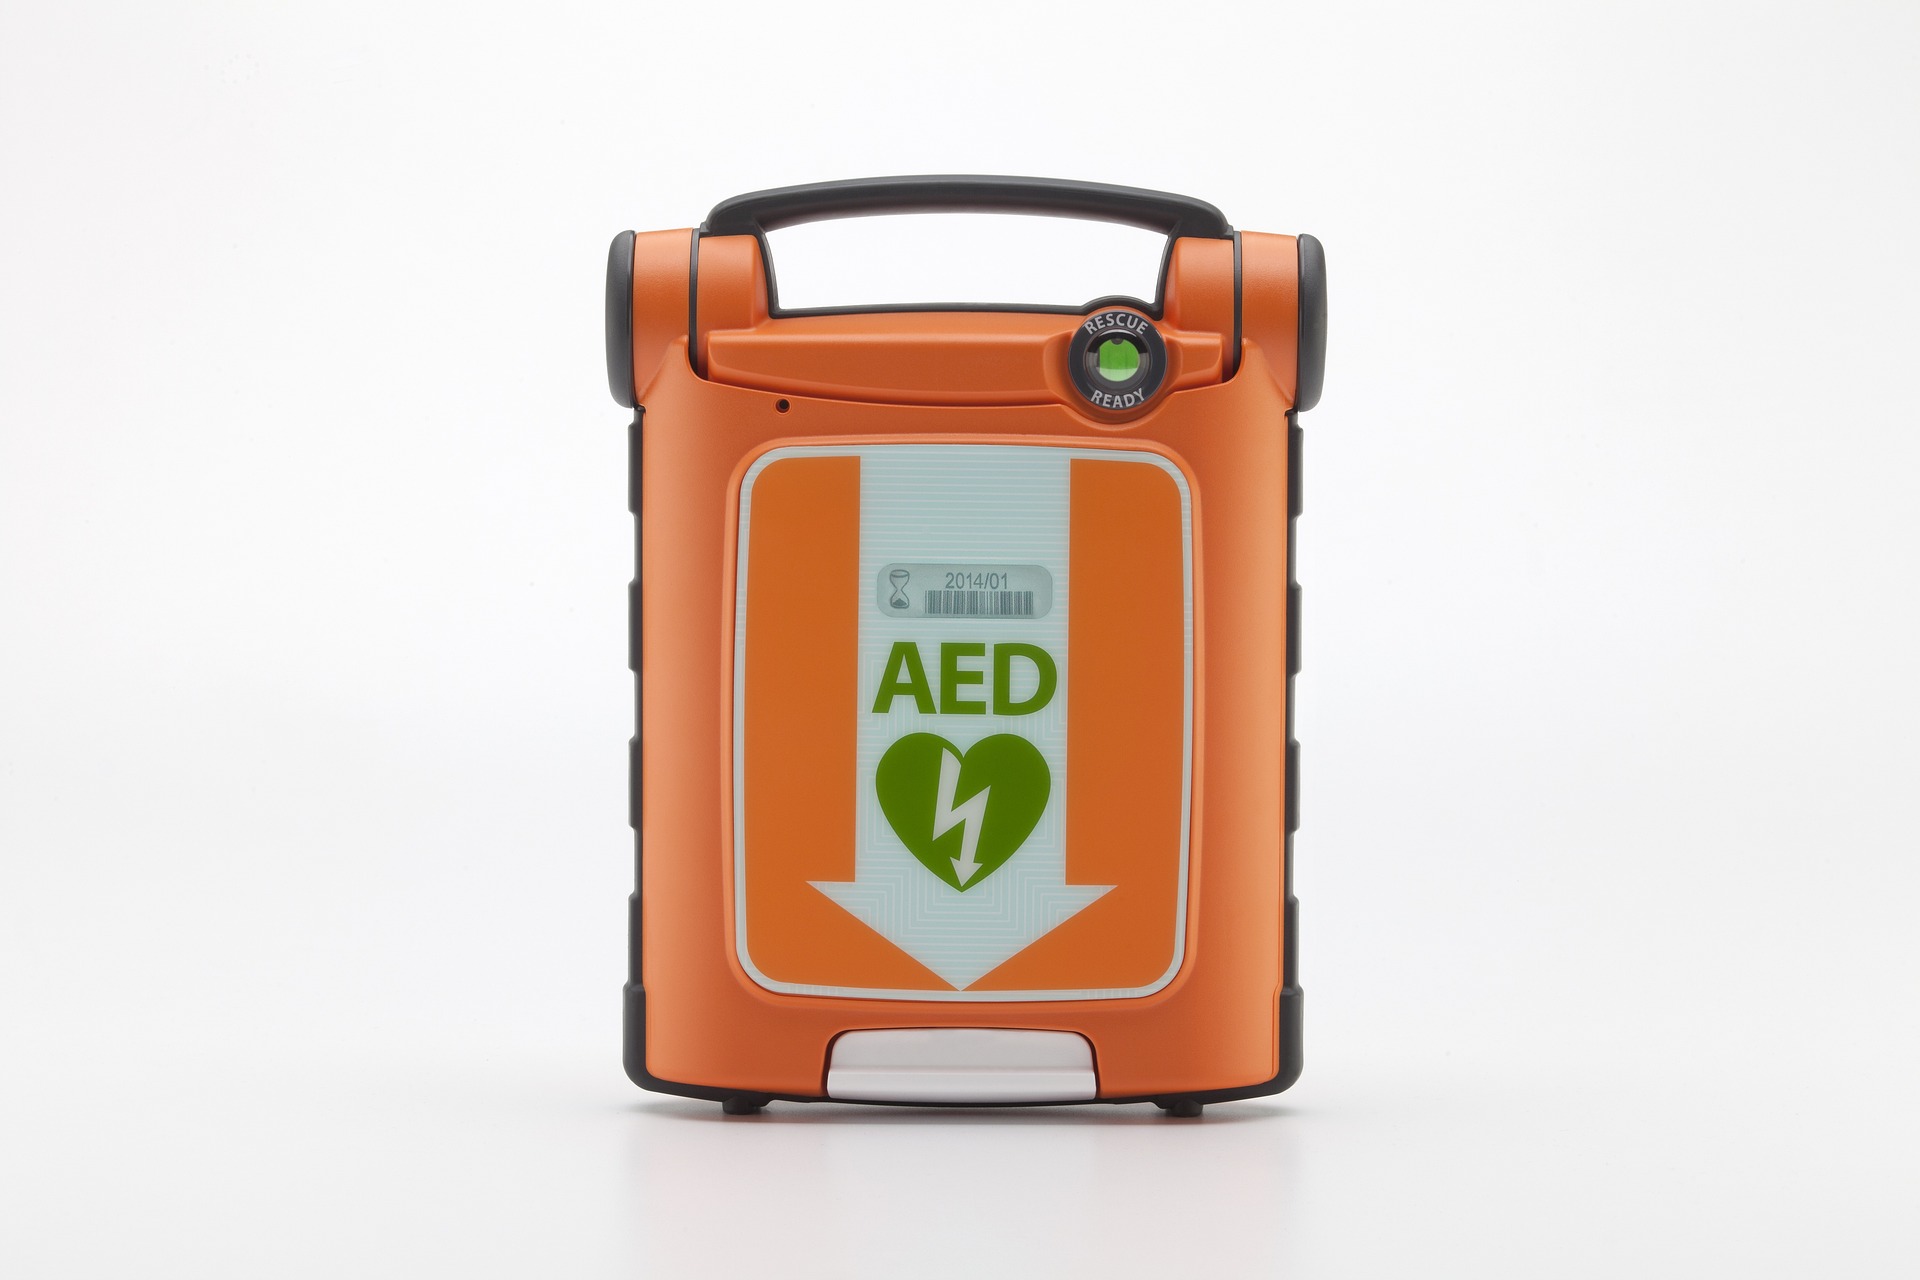 aed with green indicator light